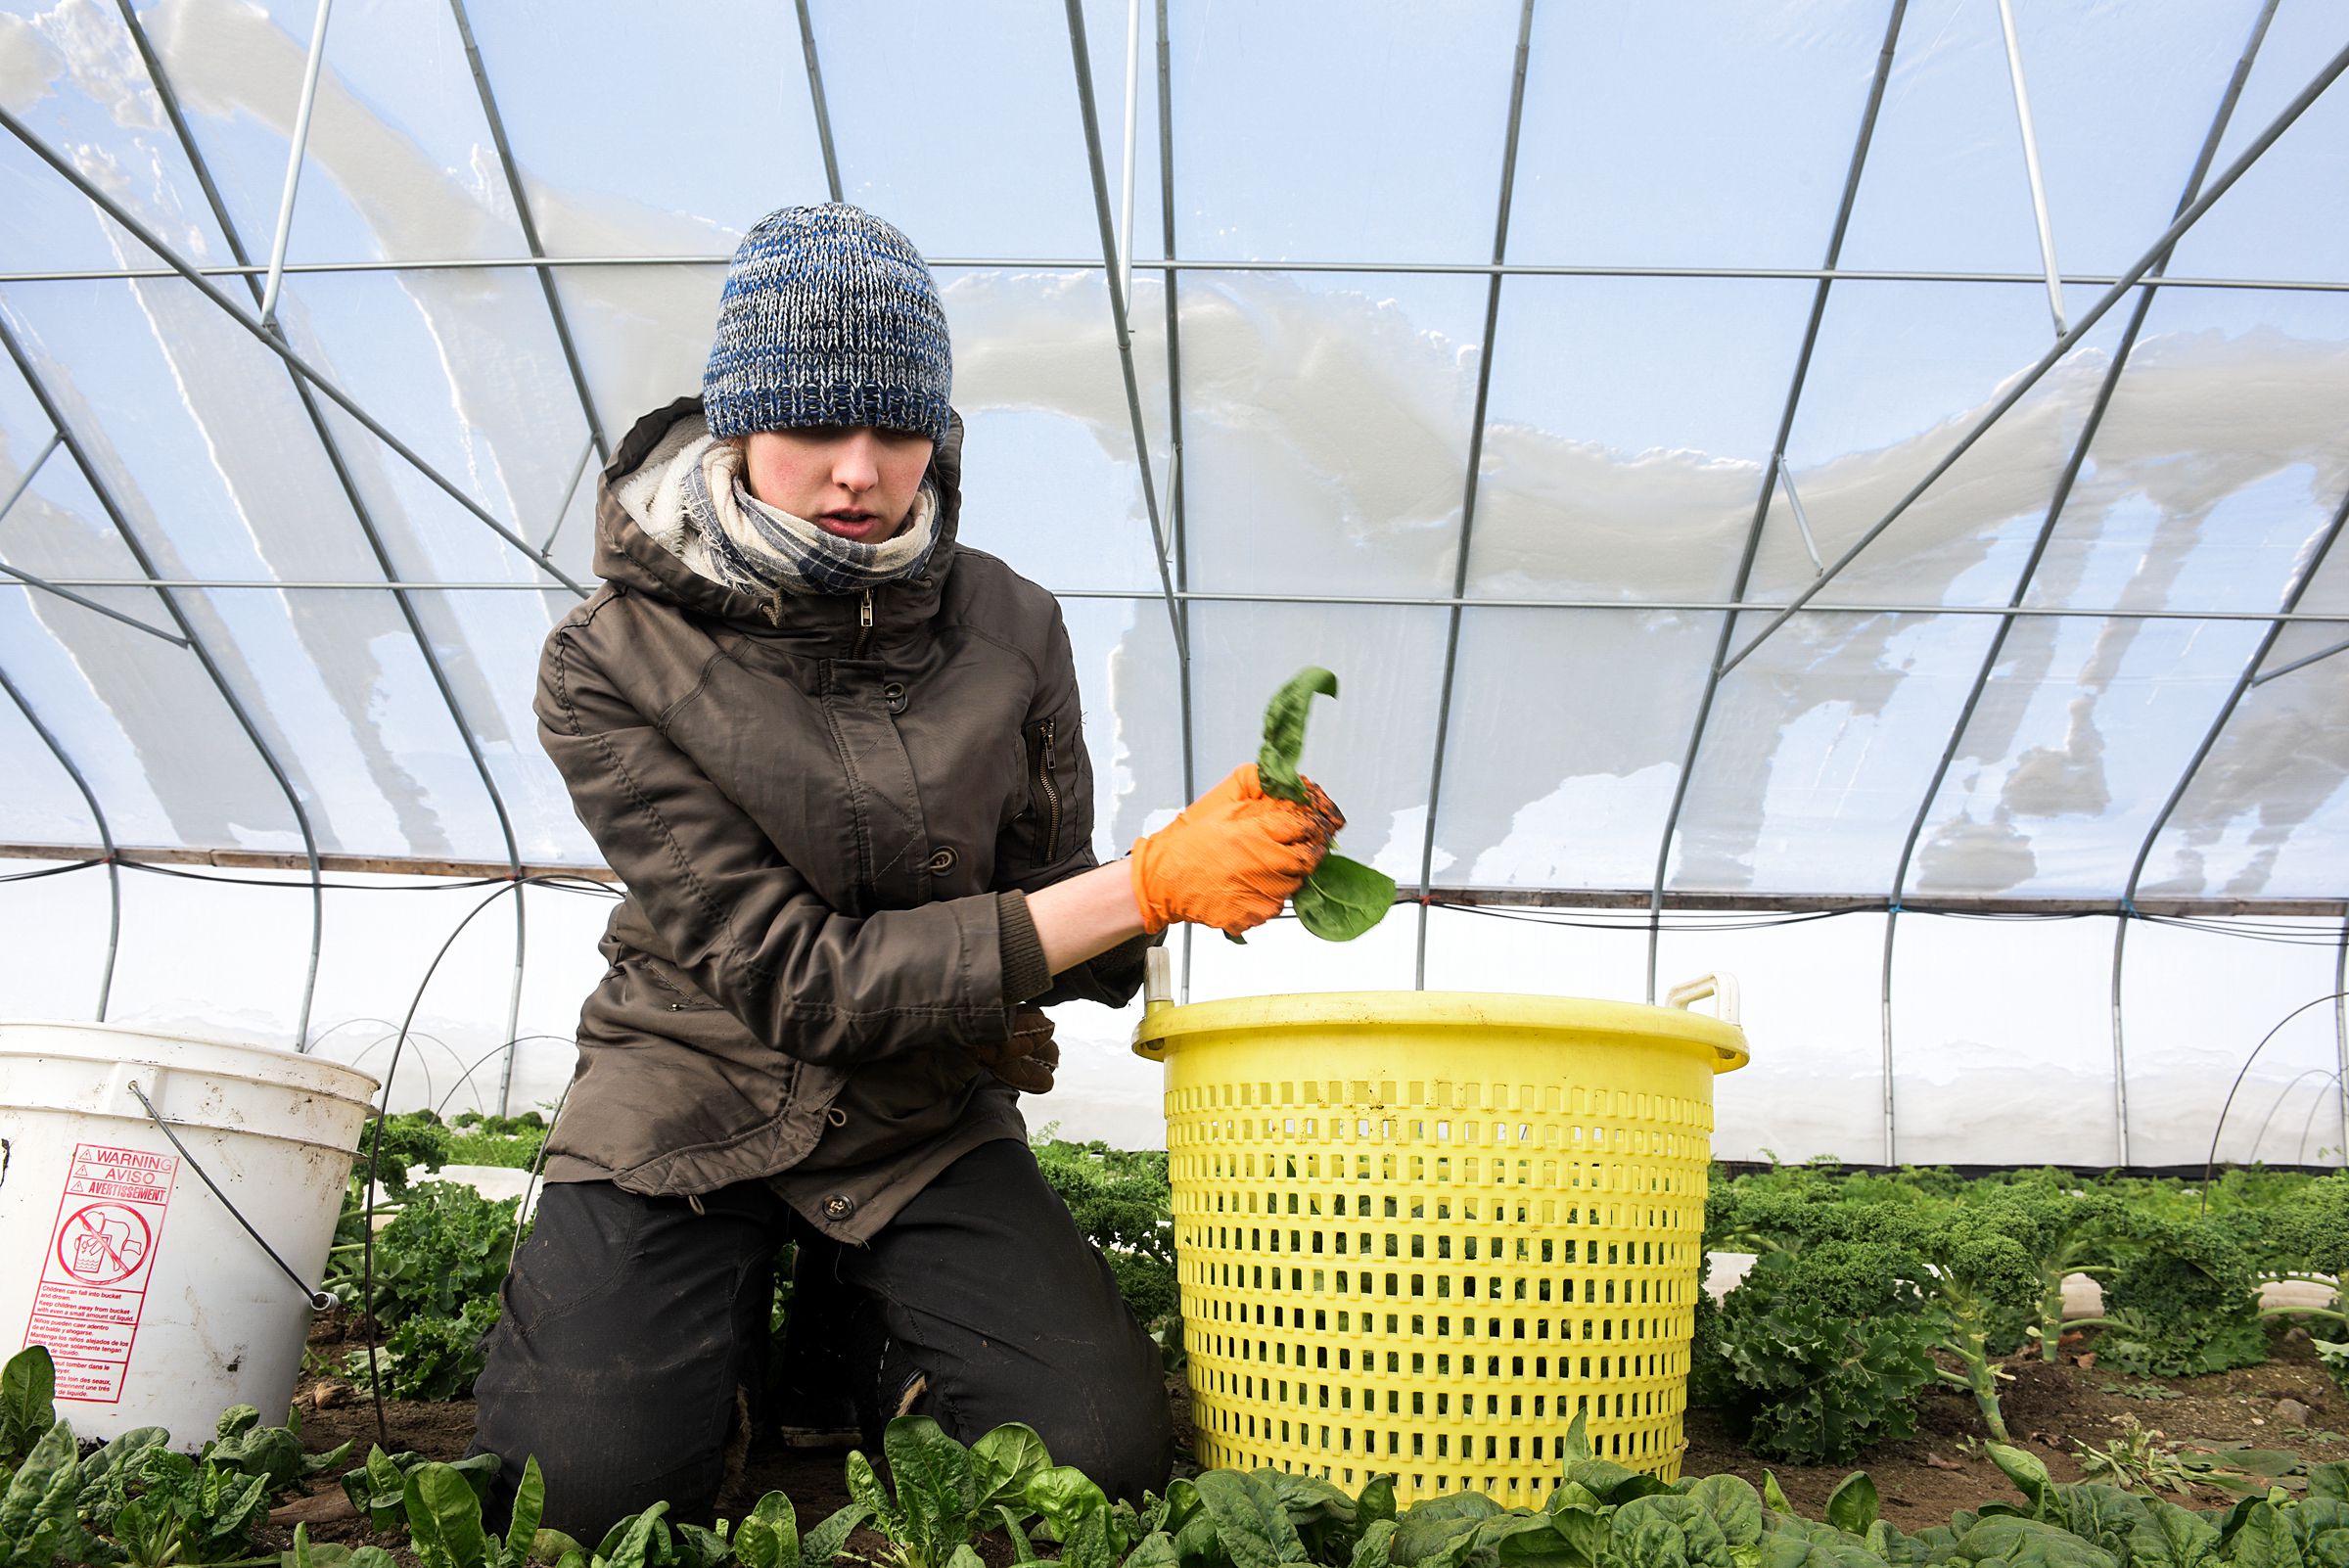 Emily Boles picks spinach at Luna Bleu Farm in Royalton, Vt., Thursday, Dec. 19, 2019, in preparation for a weekend farmers market in Norwich. A first crop of greens is planted in late September and early October and a second in late February and early March. Farmer Suzanne Long said this timing is key for allowing the plants to mature enough to produce while growing more slowly in the cold temperatures. (Valley News - James M. Patterson) Copyright Valley News. May not be reprinted or used online without permission. Send requests to permission@vnews.com.